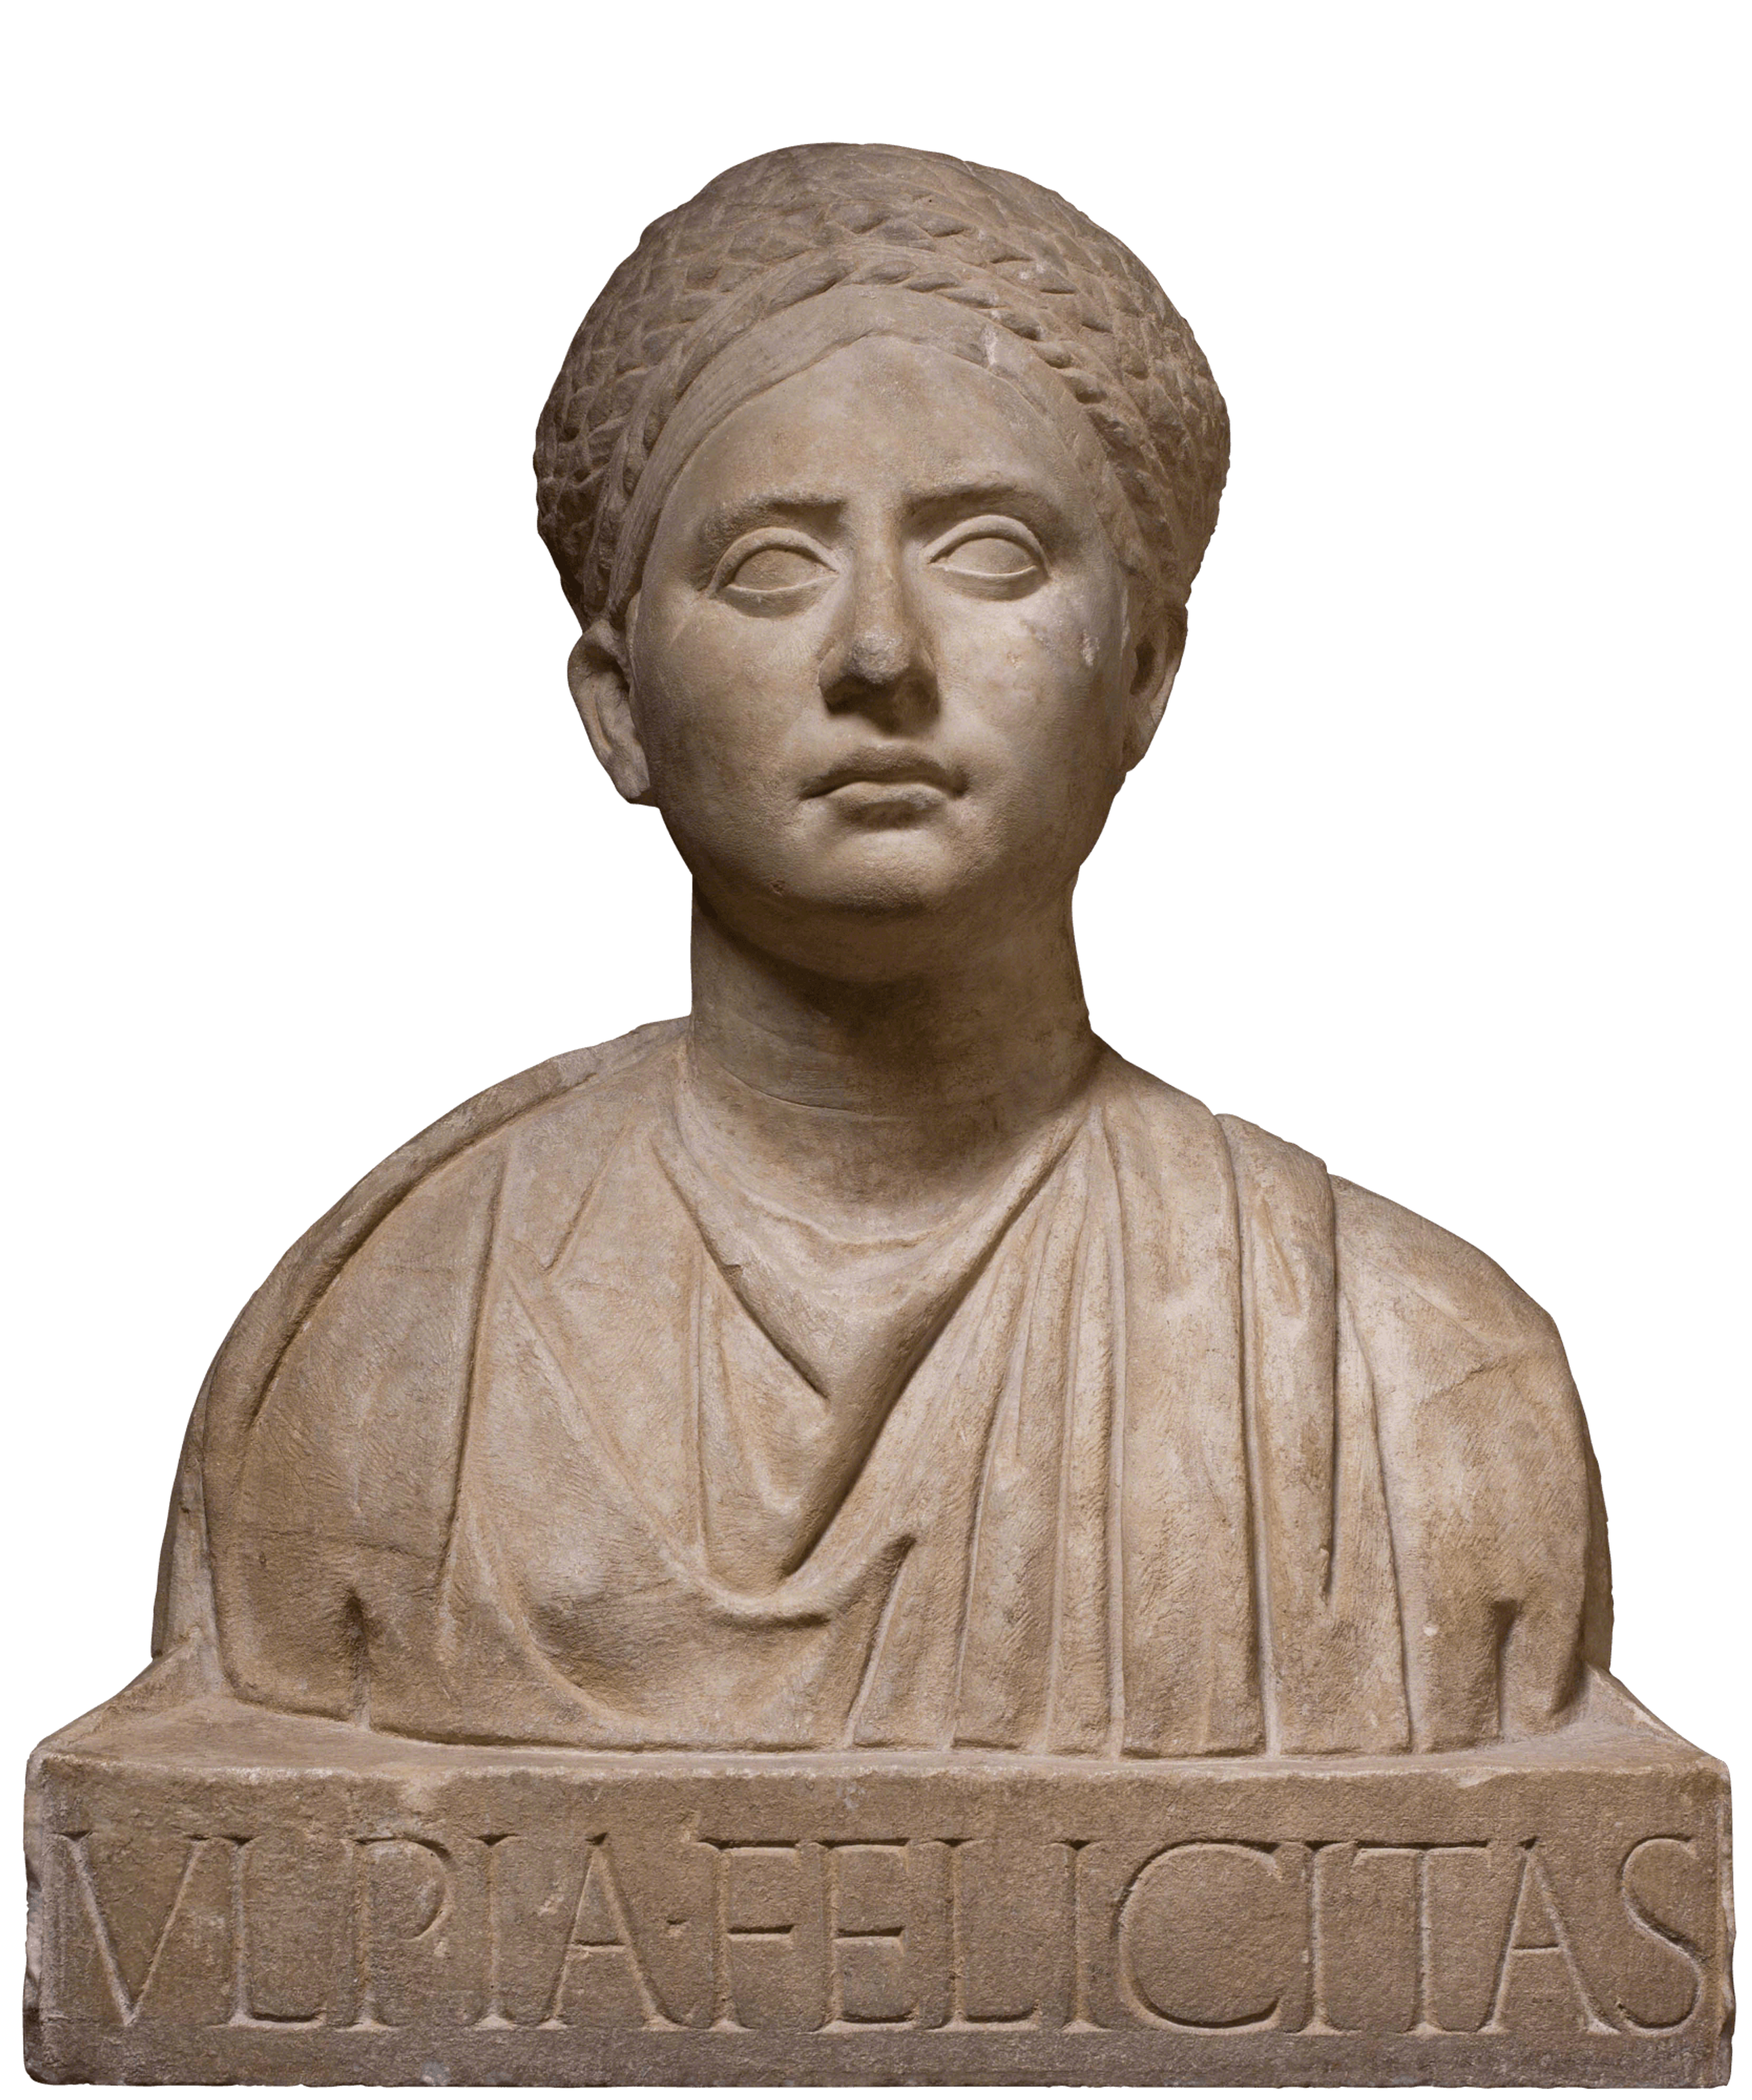 High relief with bust of Ulpia Felicitas